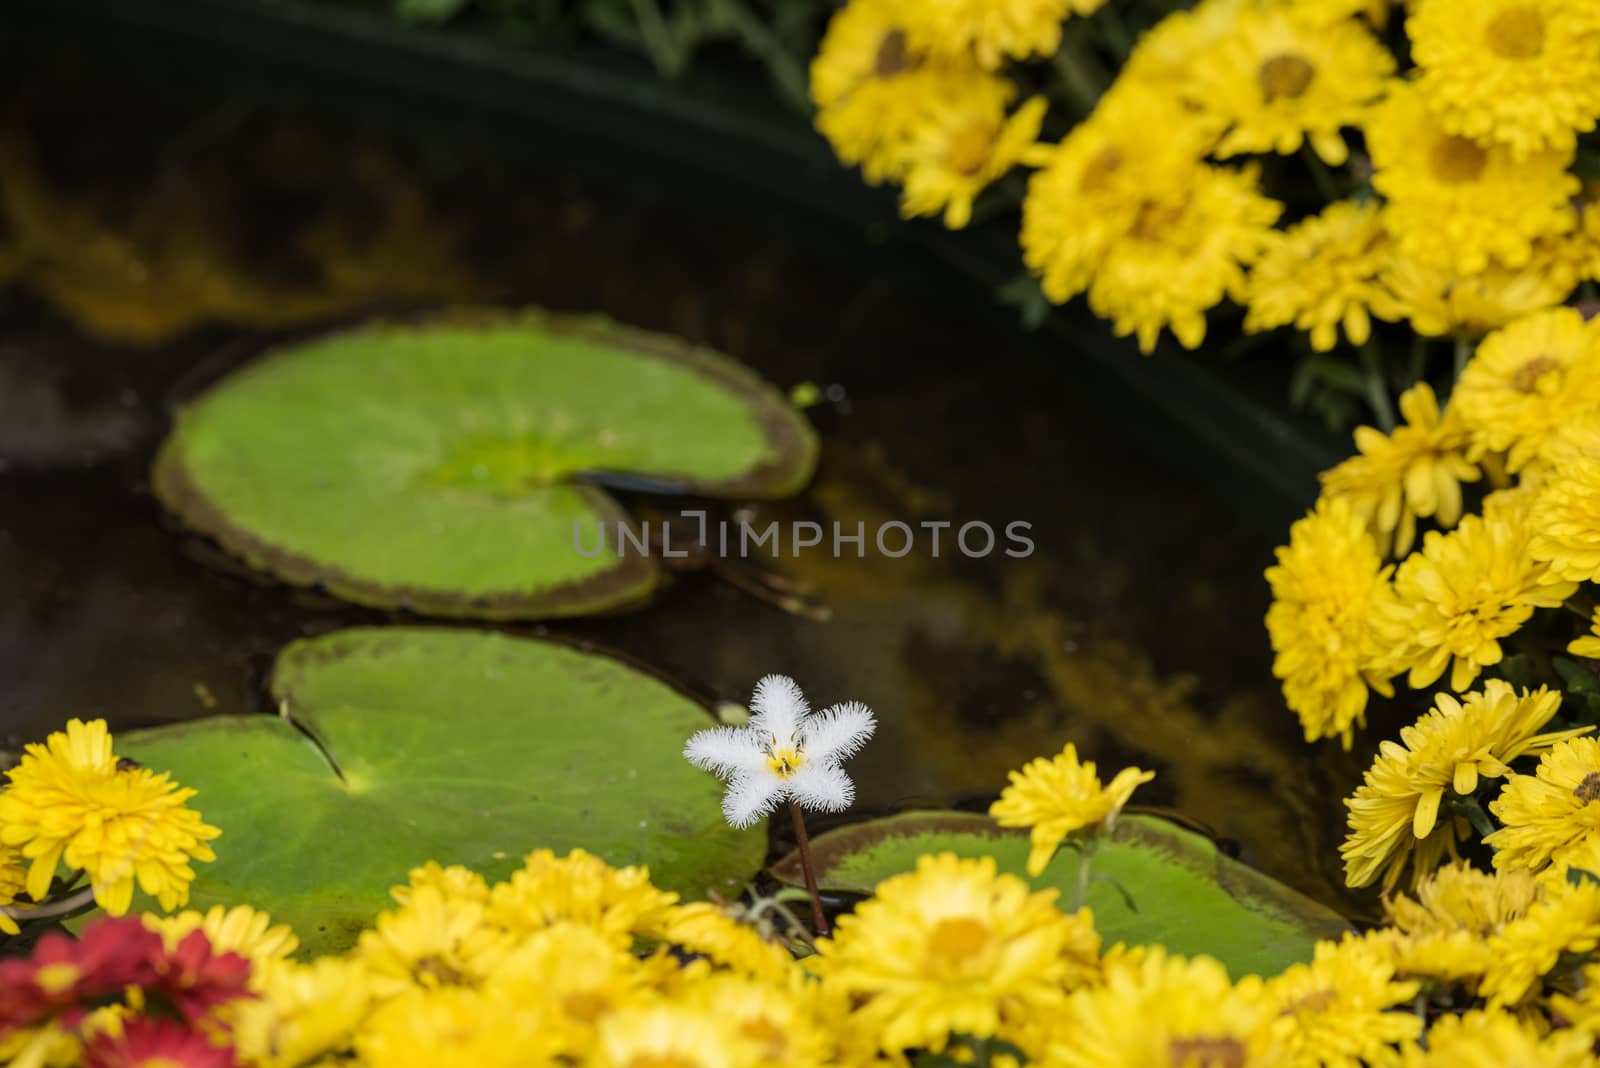 Nenuphar leaves and yellow flowers in a pond